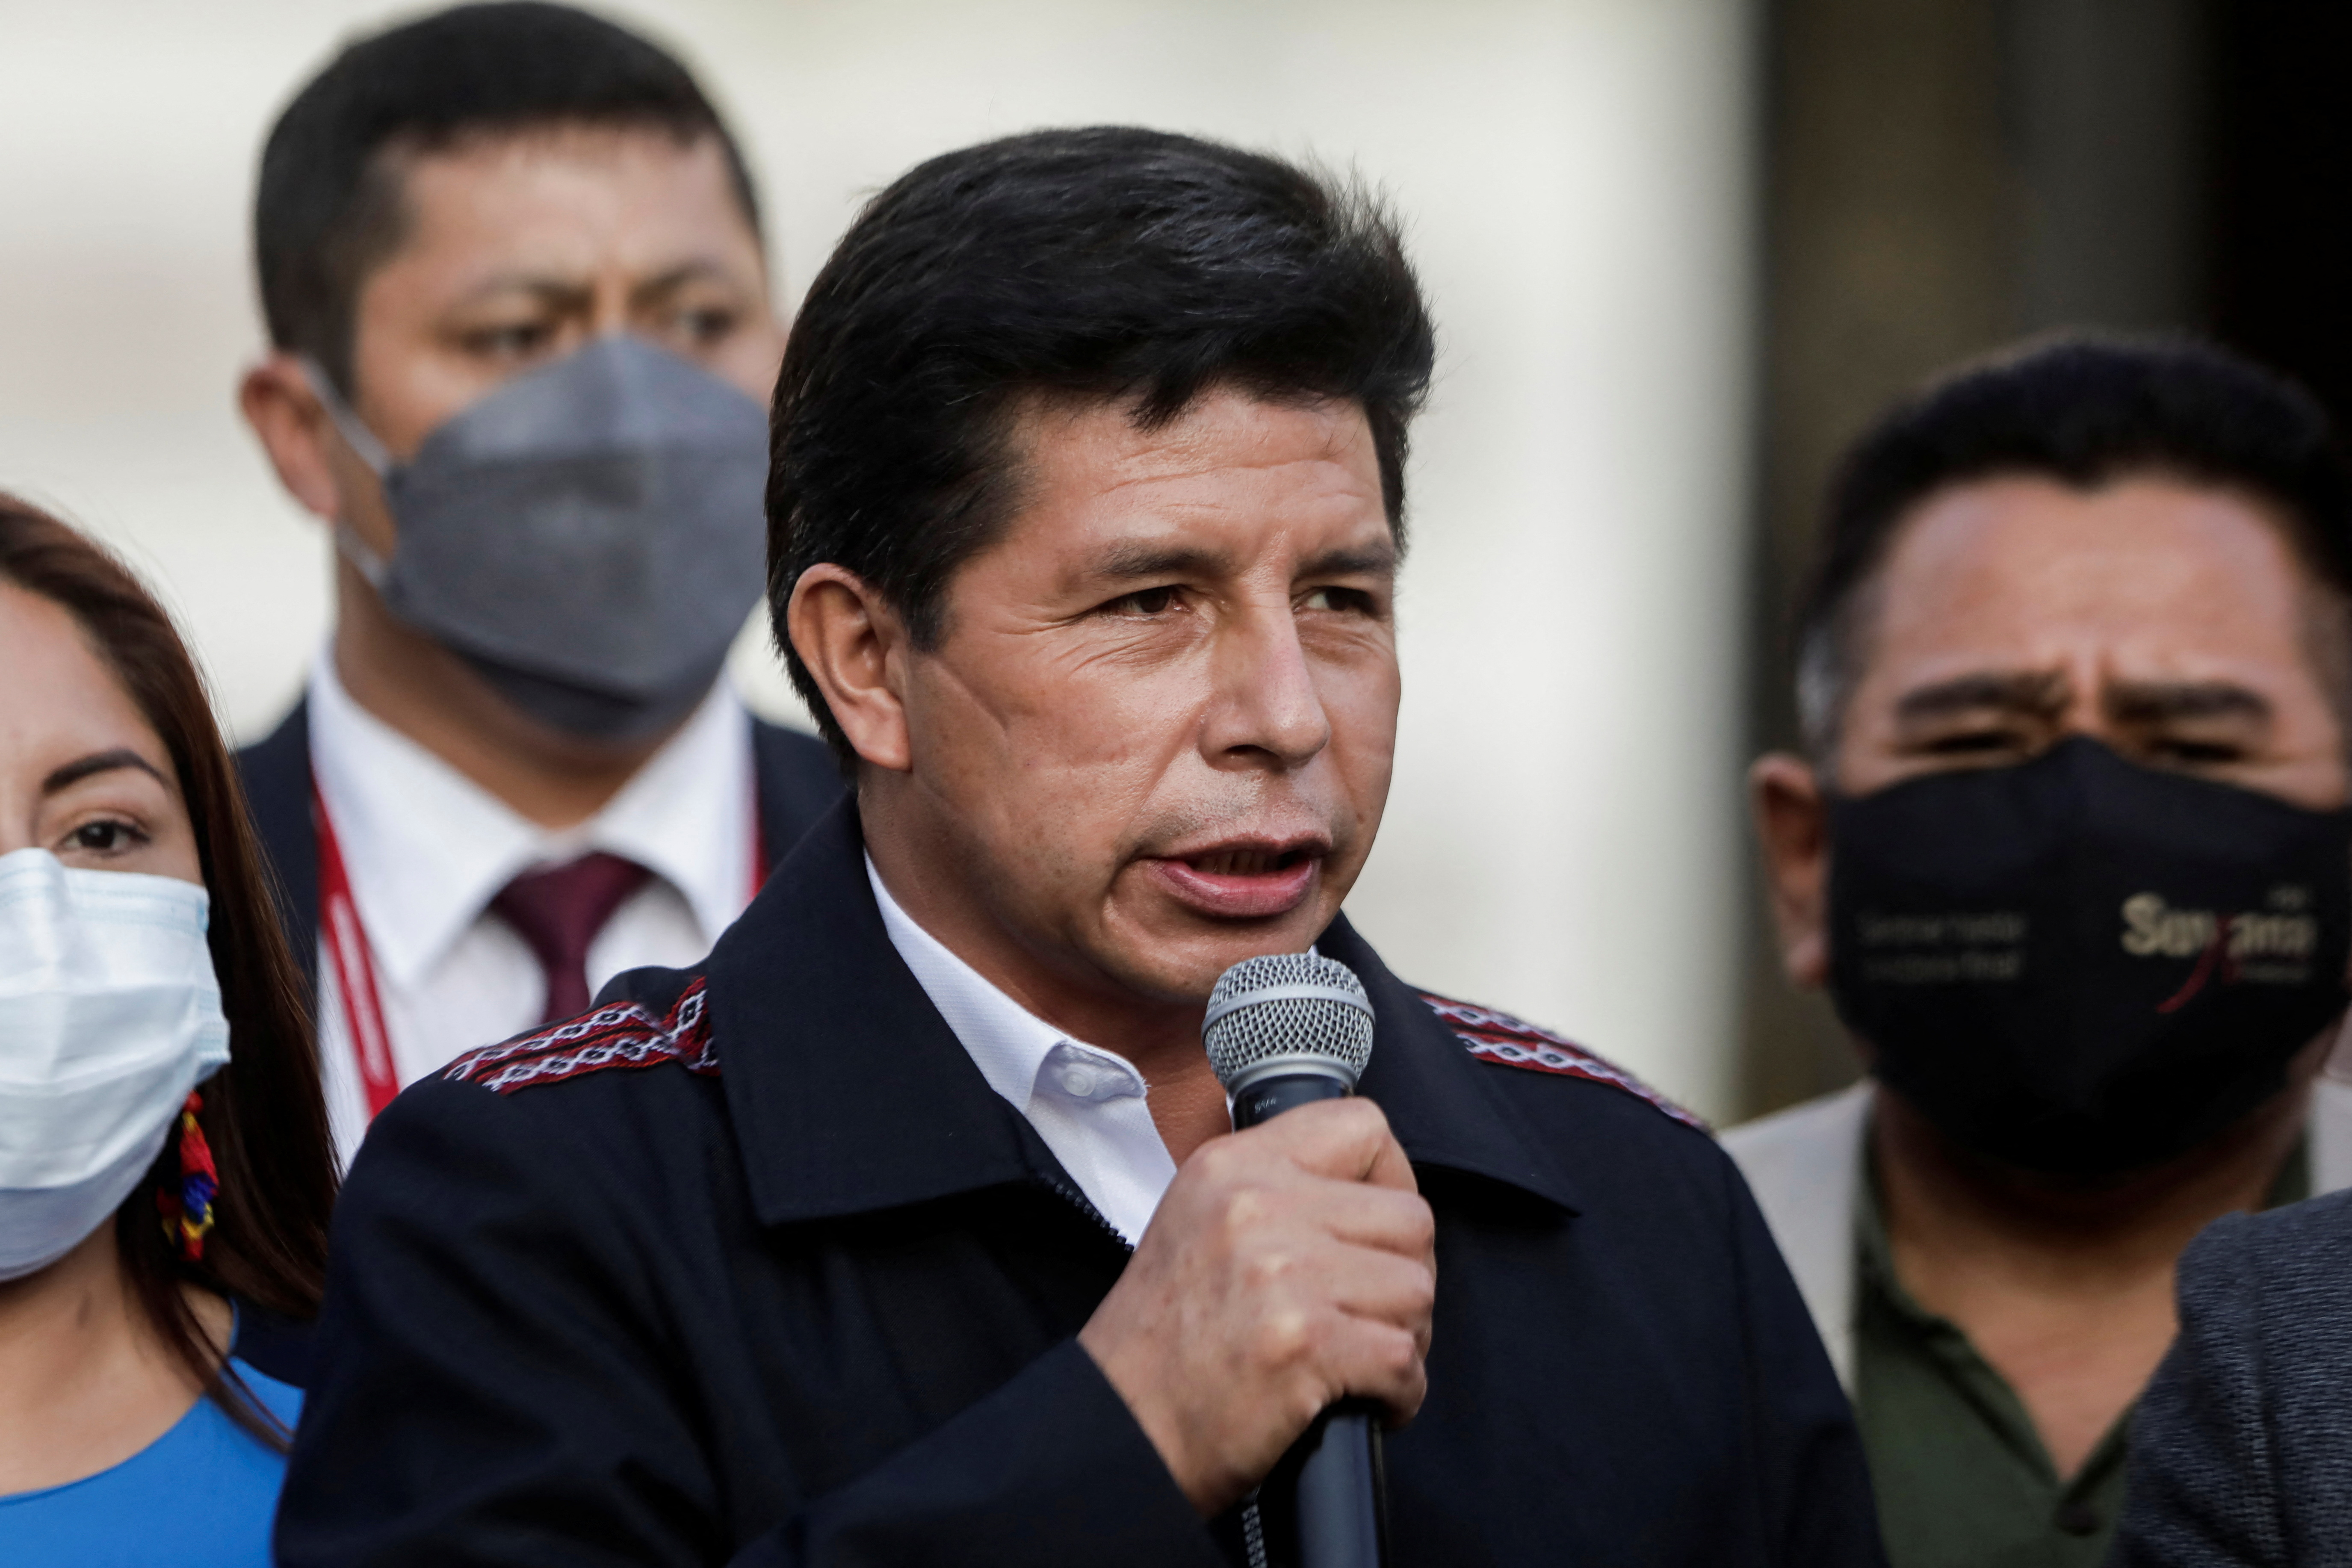 Peru's Castillo leaves congress after lifting curfew imposed over fuel cost protests in Lima